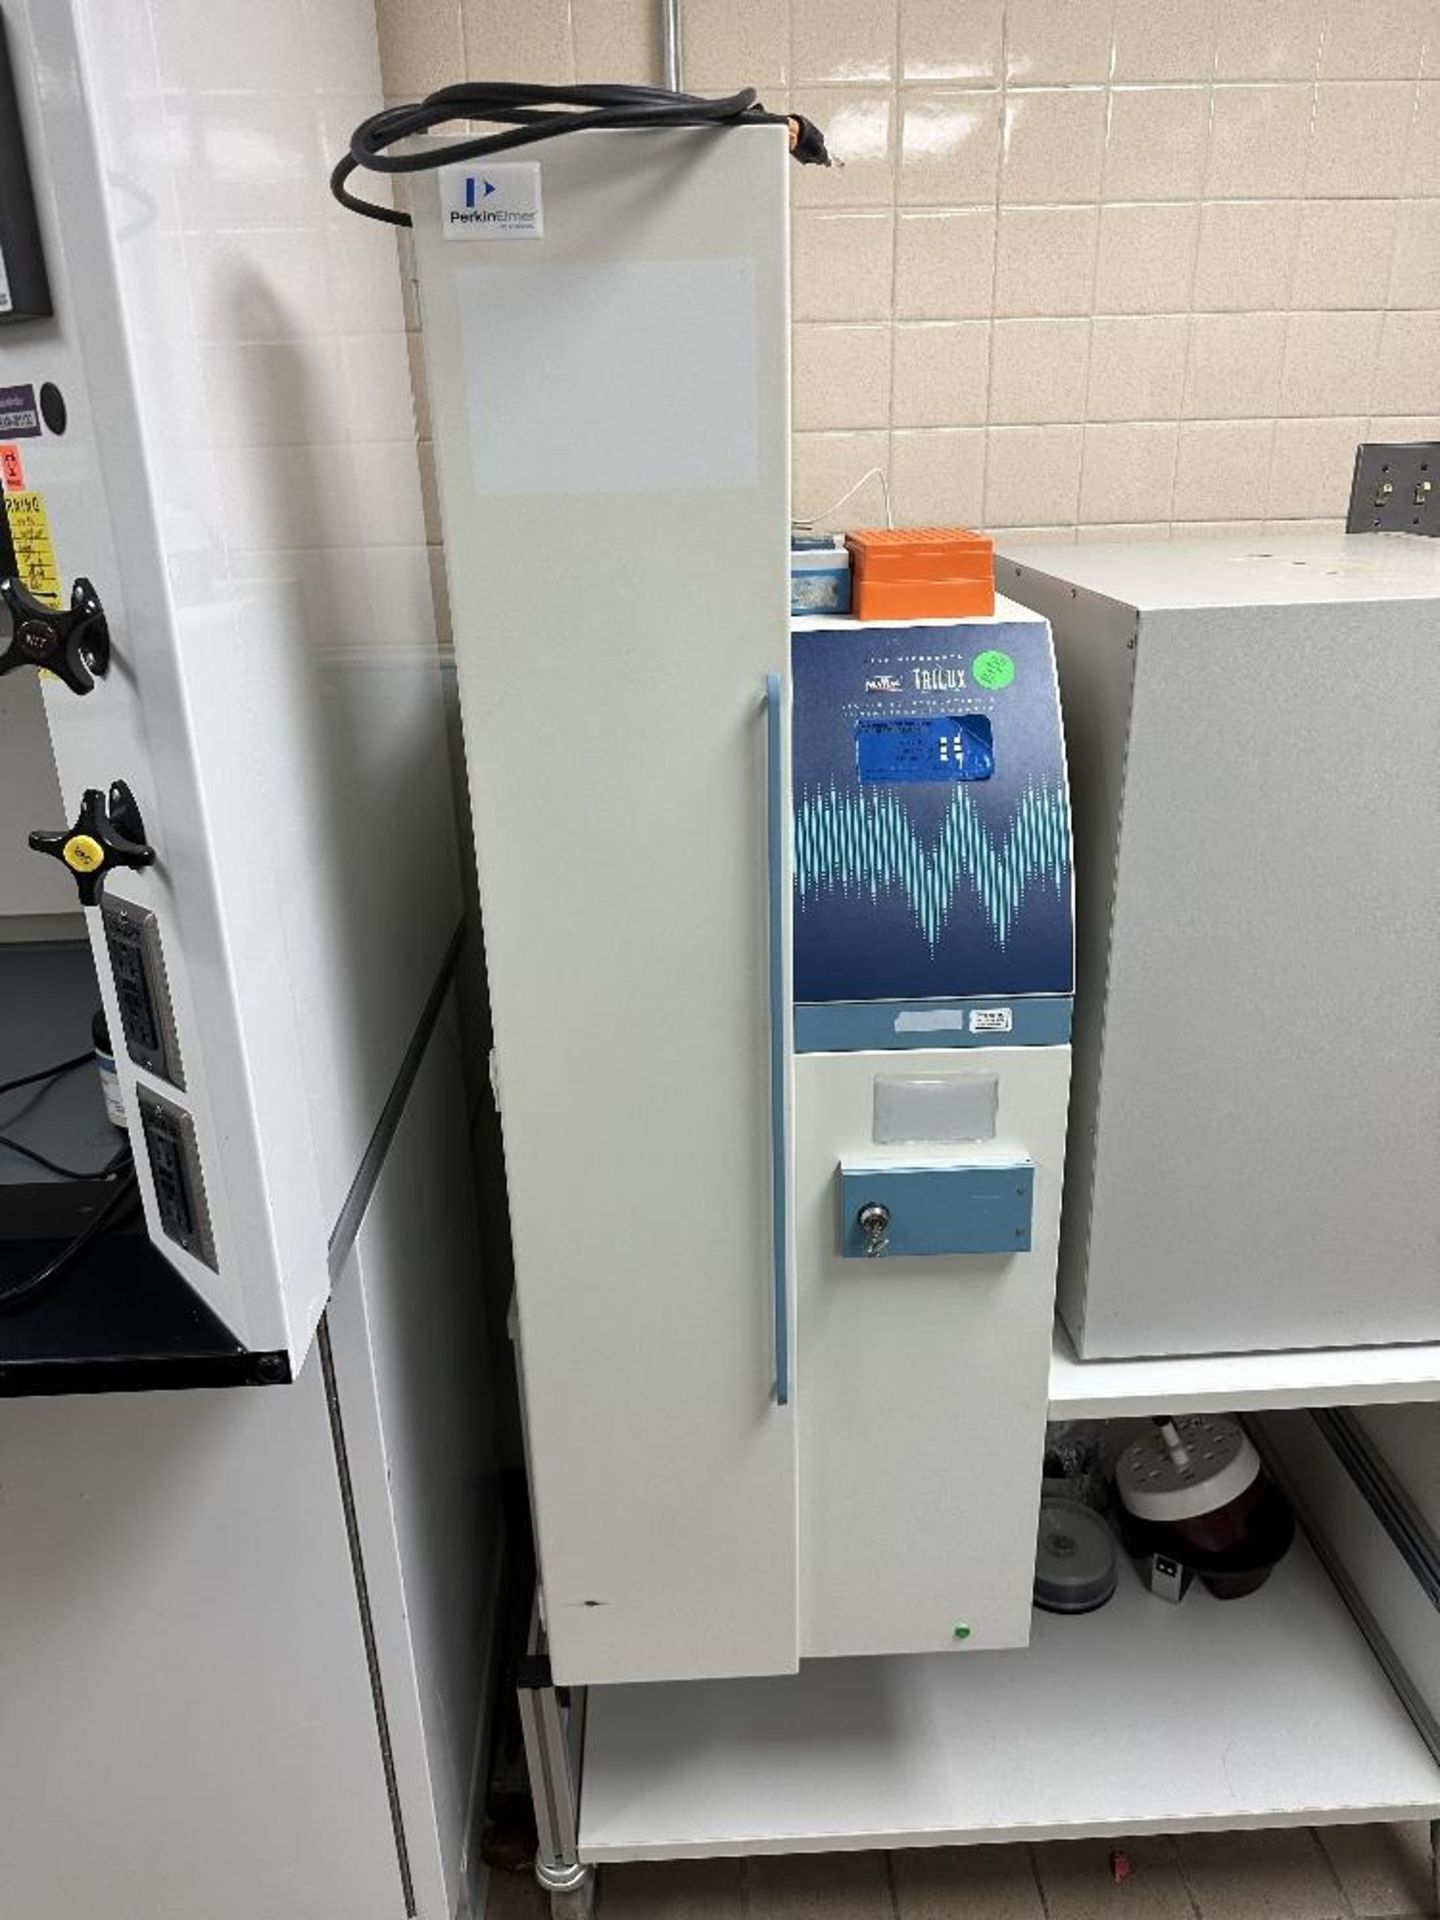 Wallac 1450 MicroBeta TriLux Liquid Scintillation Counter (LOCATED IN MIDDLETOWN, N.Y.)-FOR